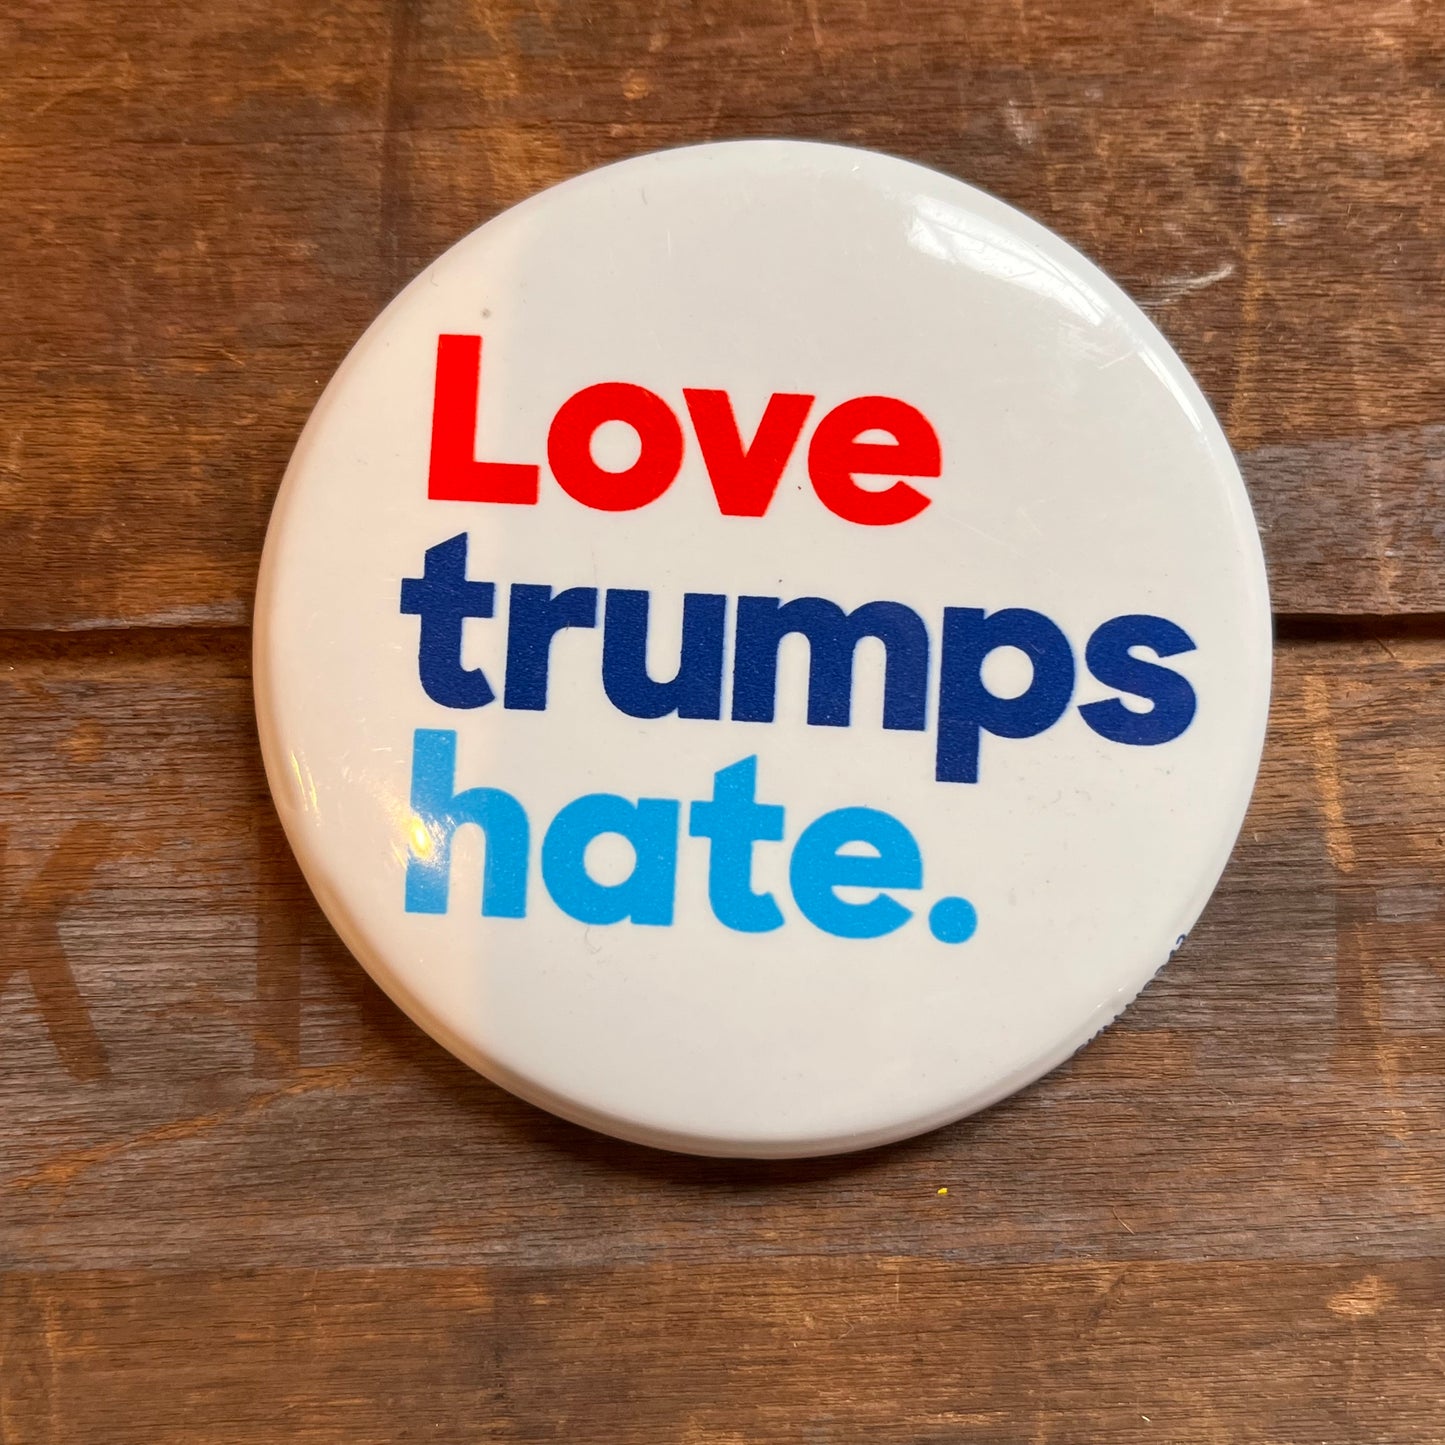 【USA vintage】缶バッジ　Love trumps hate.